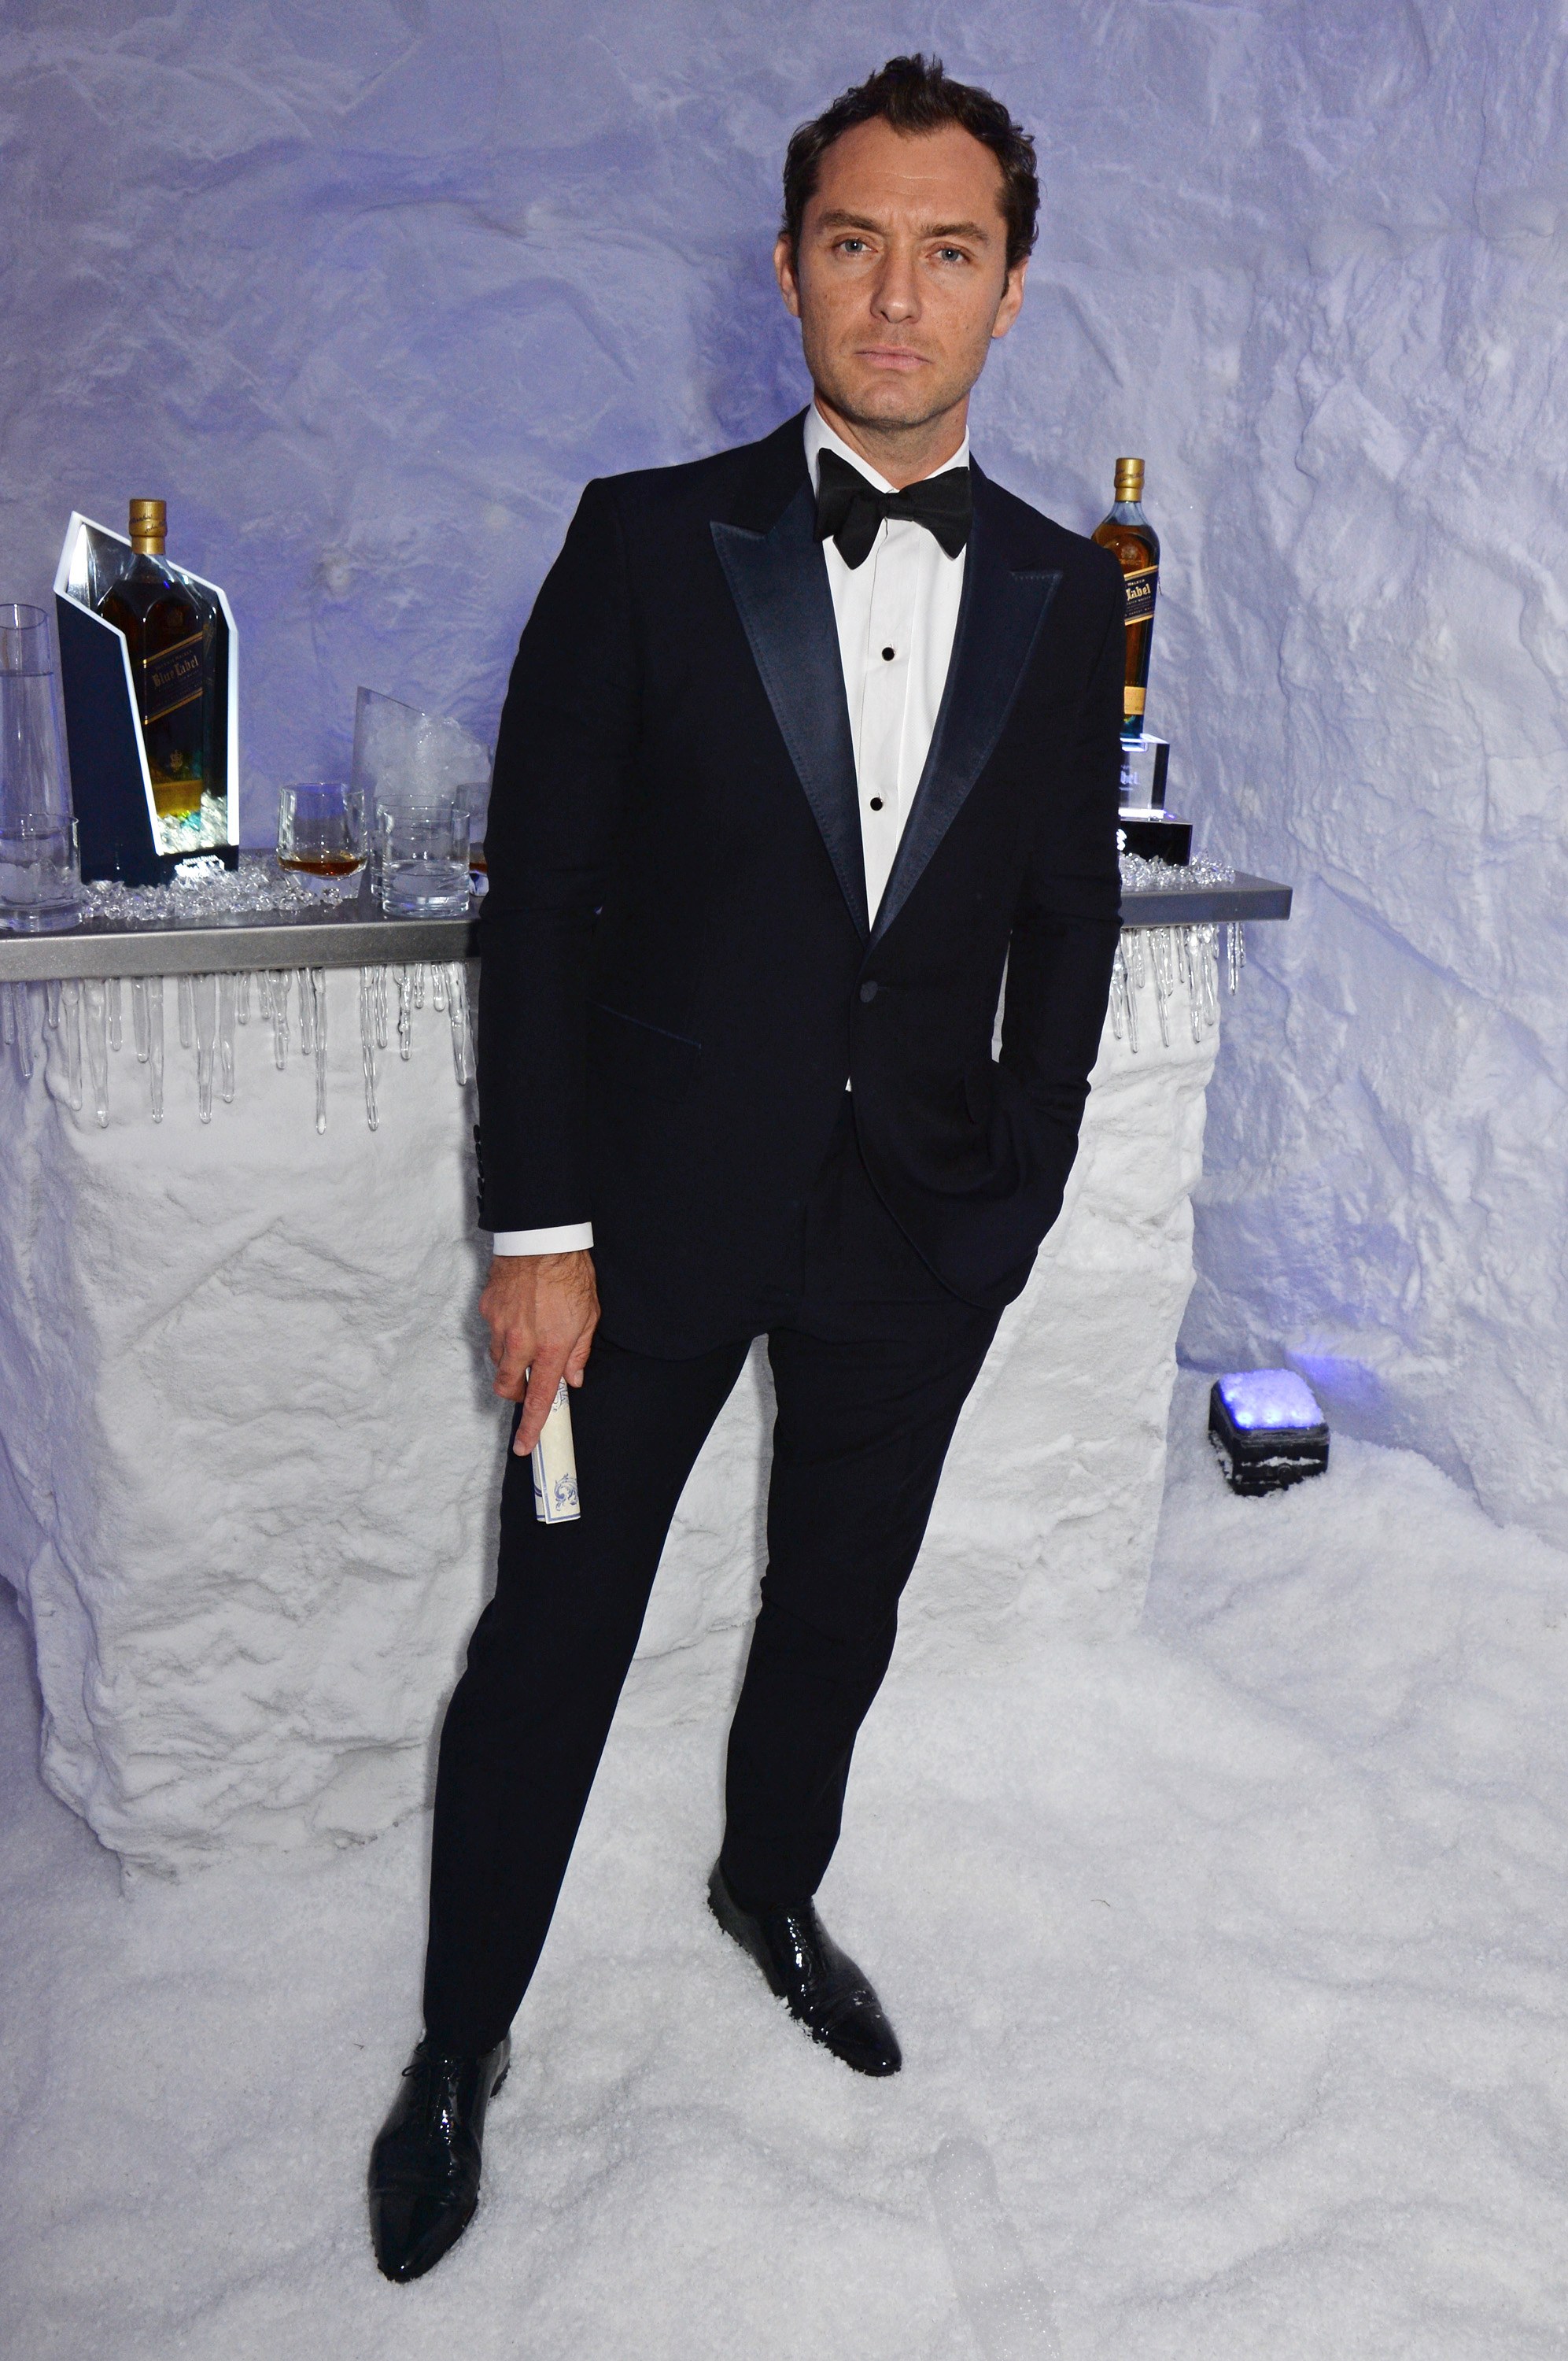 Jude Law Sports Tuxedo for Johnnie Walker Blue Label Event